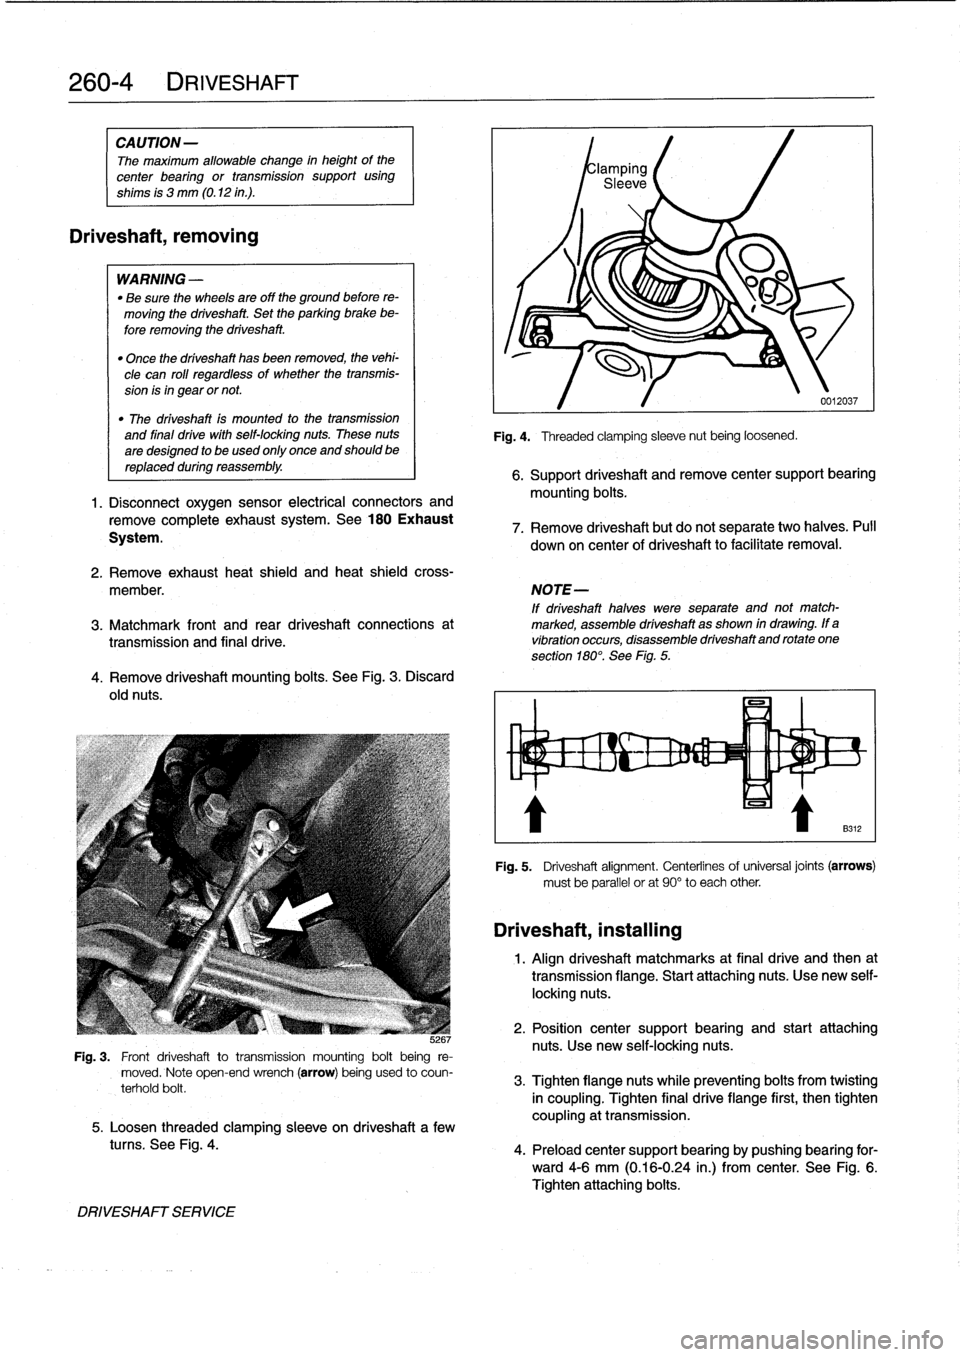 BMW 318i 1997 E36 Workshop Manual 
260-
4
DRIVESHAFT

CAUTION
-

The
maximum
allowable
change
in
height
of
the

center
bearing
or
transmission
support
using

shims
is
3
mm
(0
.12
in
.)
.

Driveshaft,
removing

WARNING
-

"
Be
sure
the